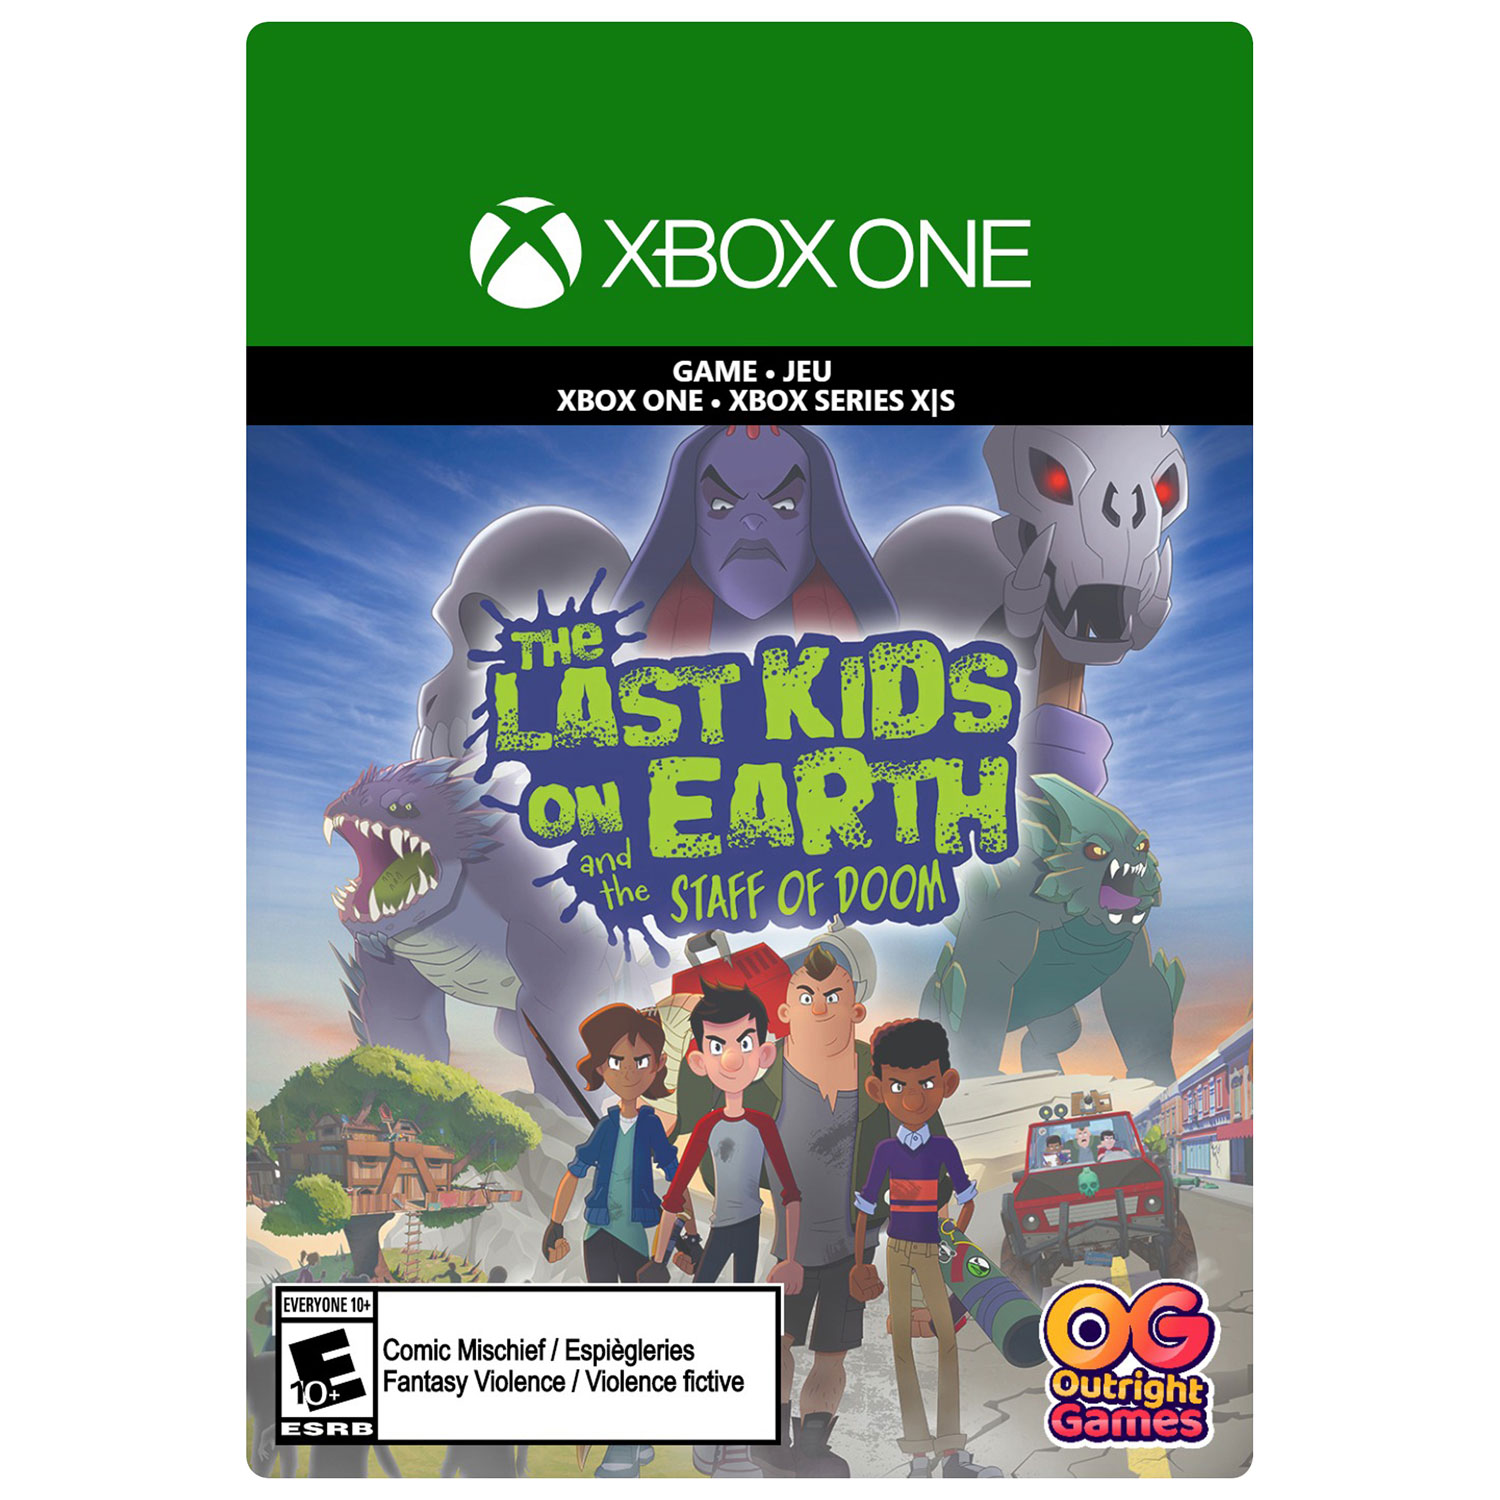 The Last Kids on Earth and the Staff of Doom (Xbox One / Xbox Series X|S) - Digital Download